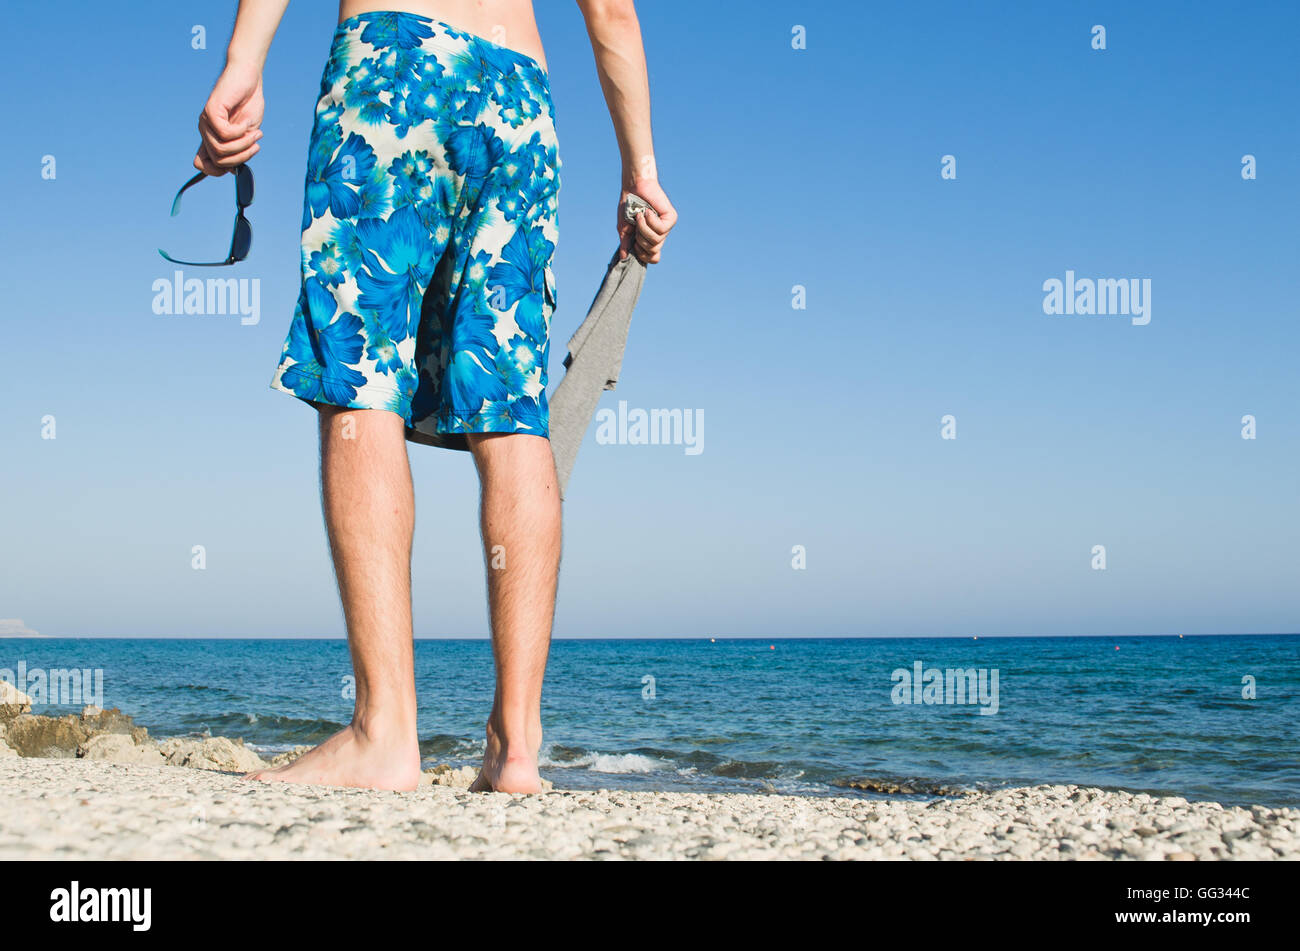 Surfer standing near the ocean on the beach against the backdrop of beautiful landscape Stock Photo